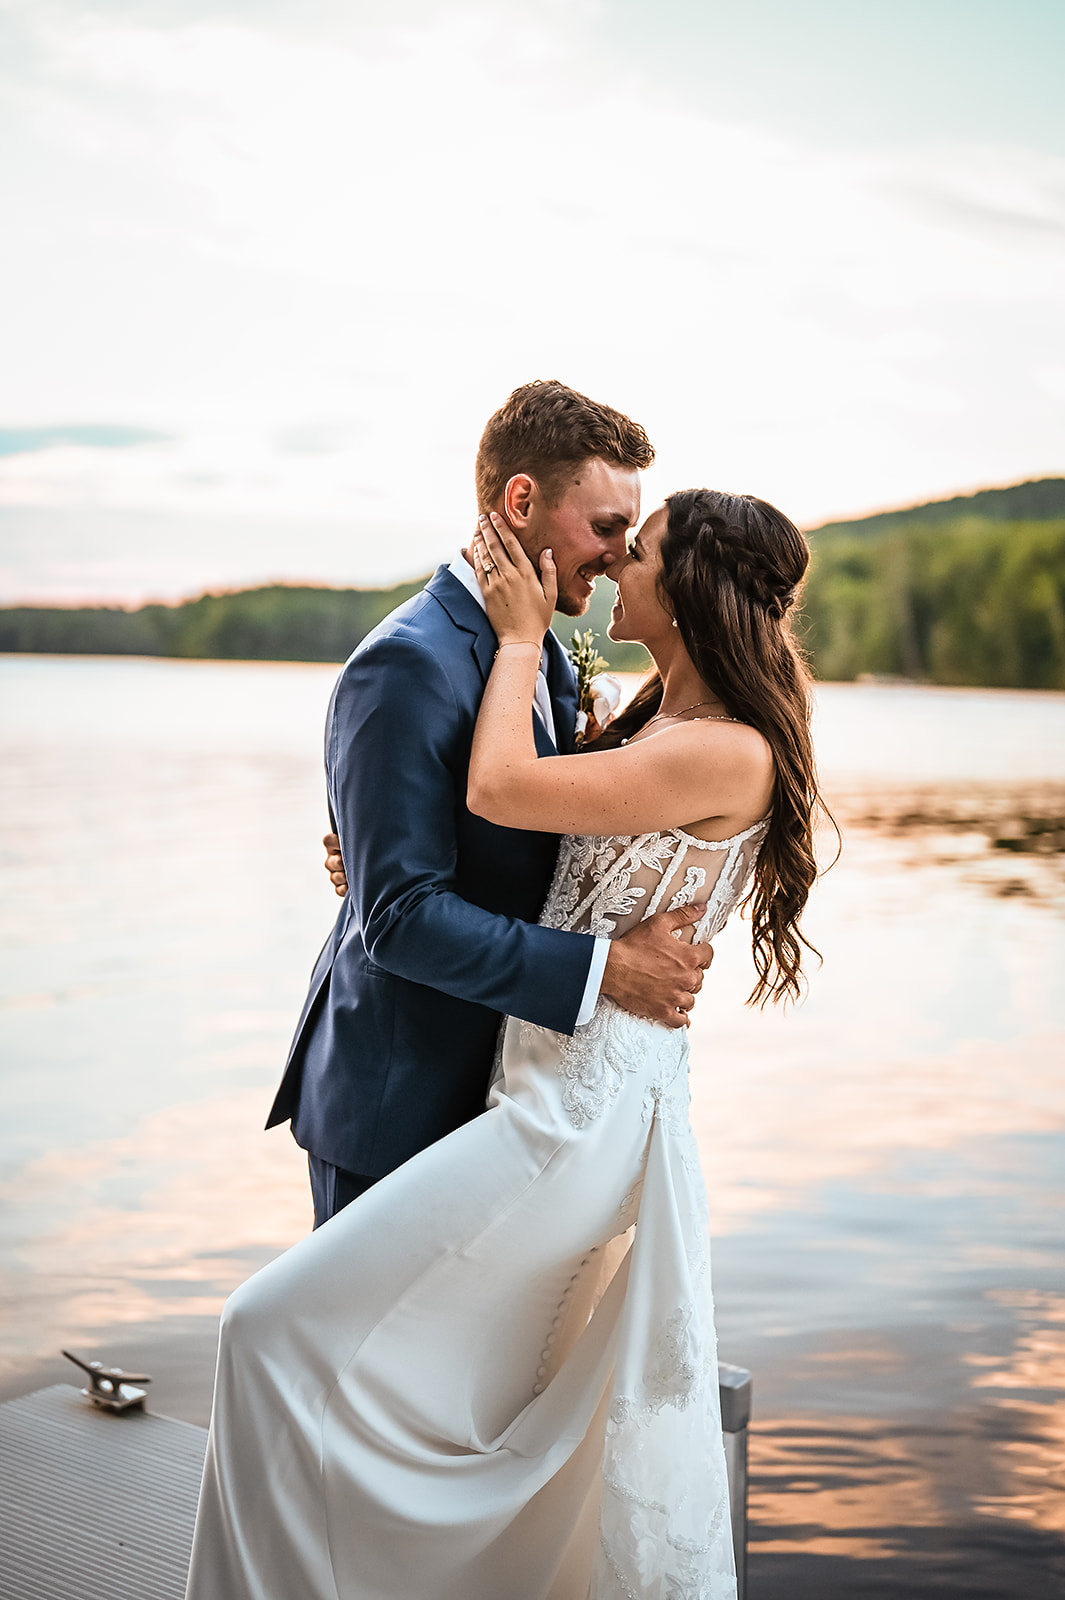 Chandler and Tyler were married at The Water's Edge Estate in Skowhegan, Maine. The setting for the wedding was absolute